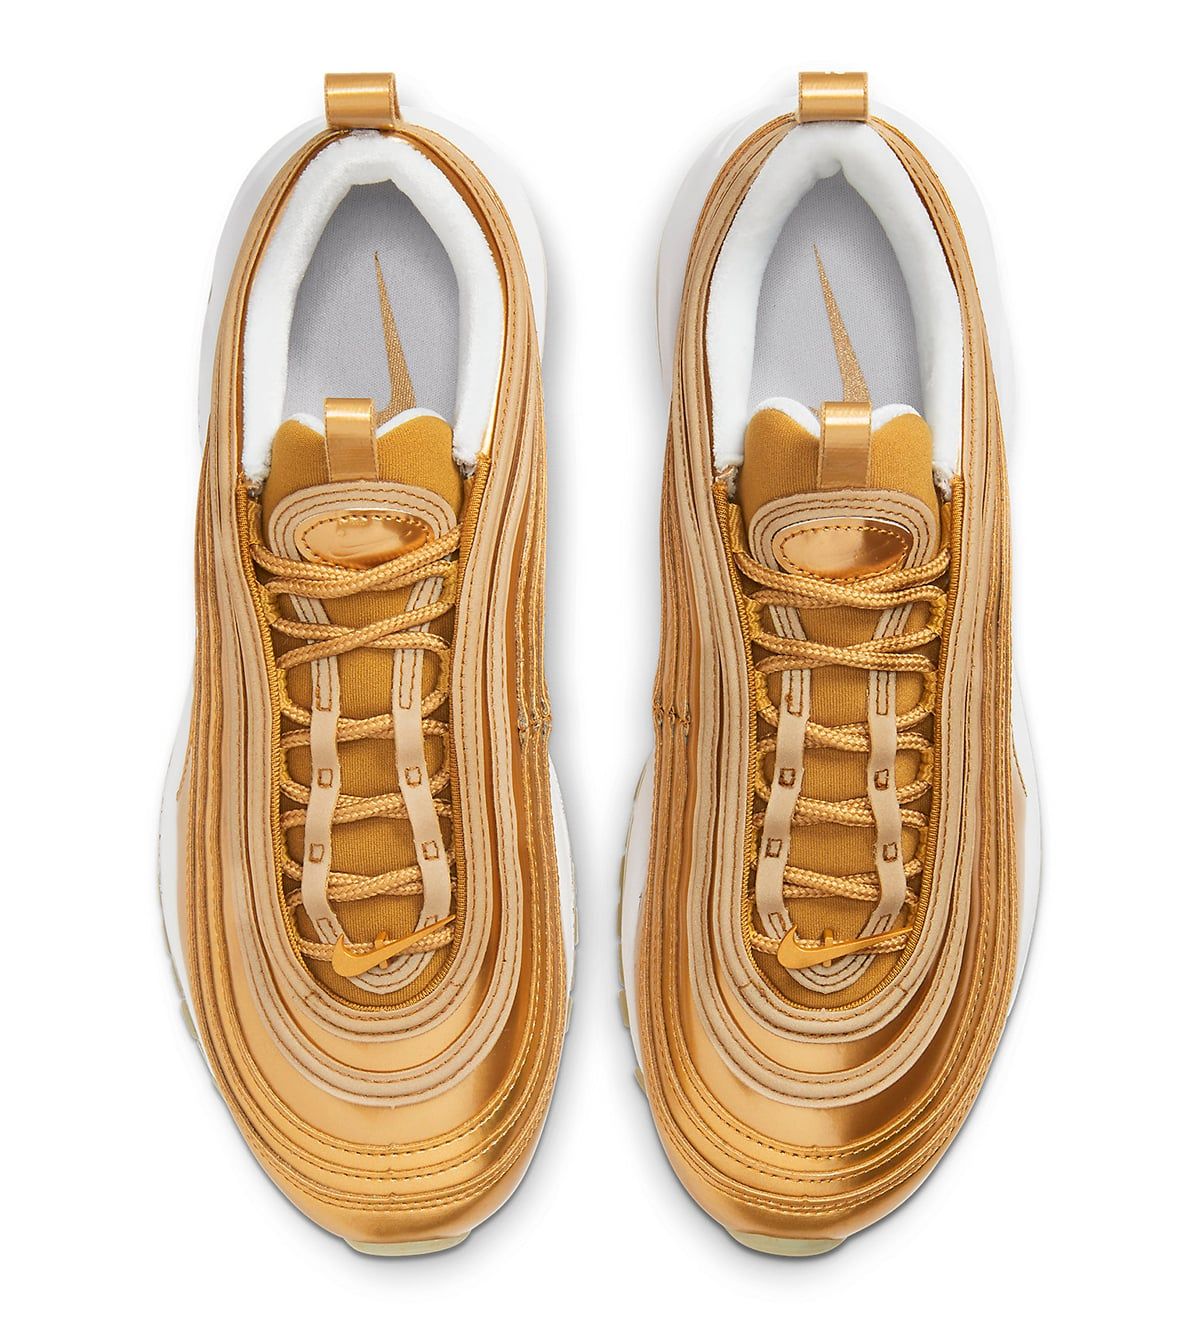 air max 97 gold medal release date